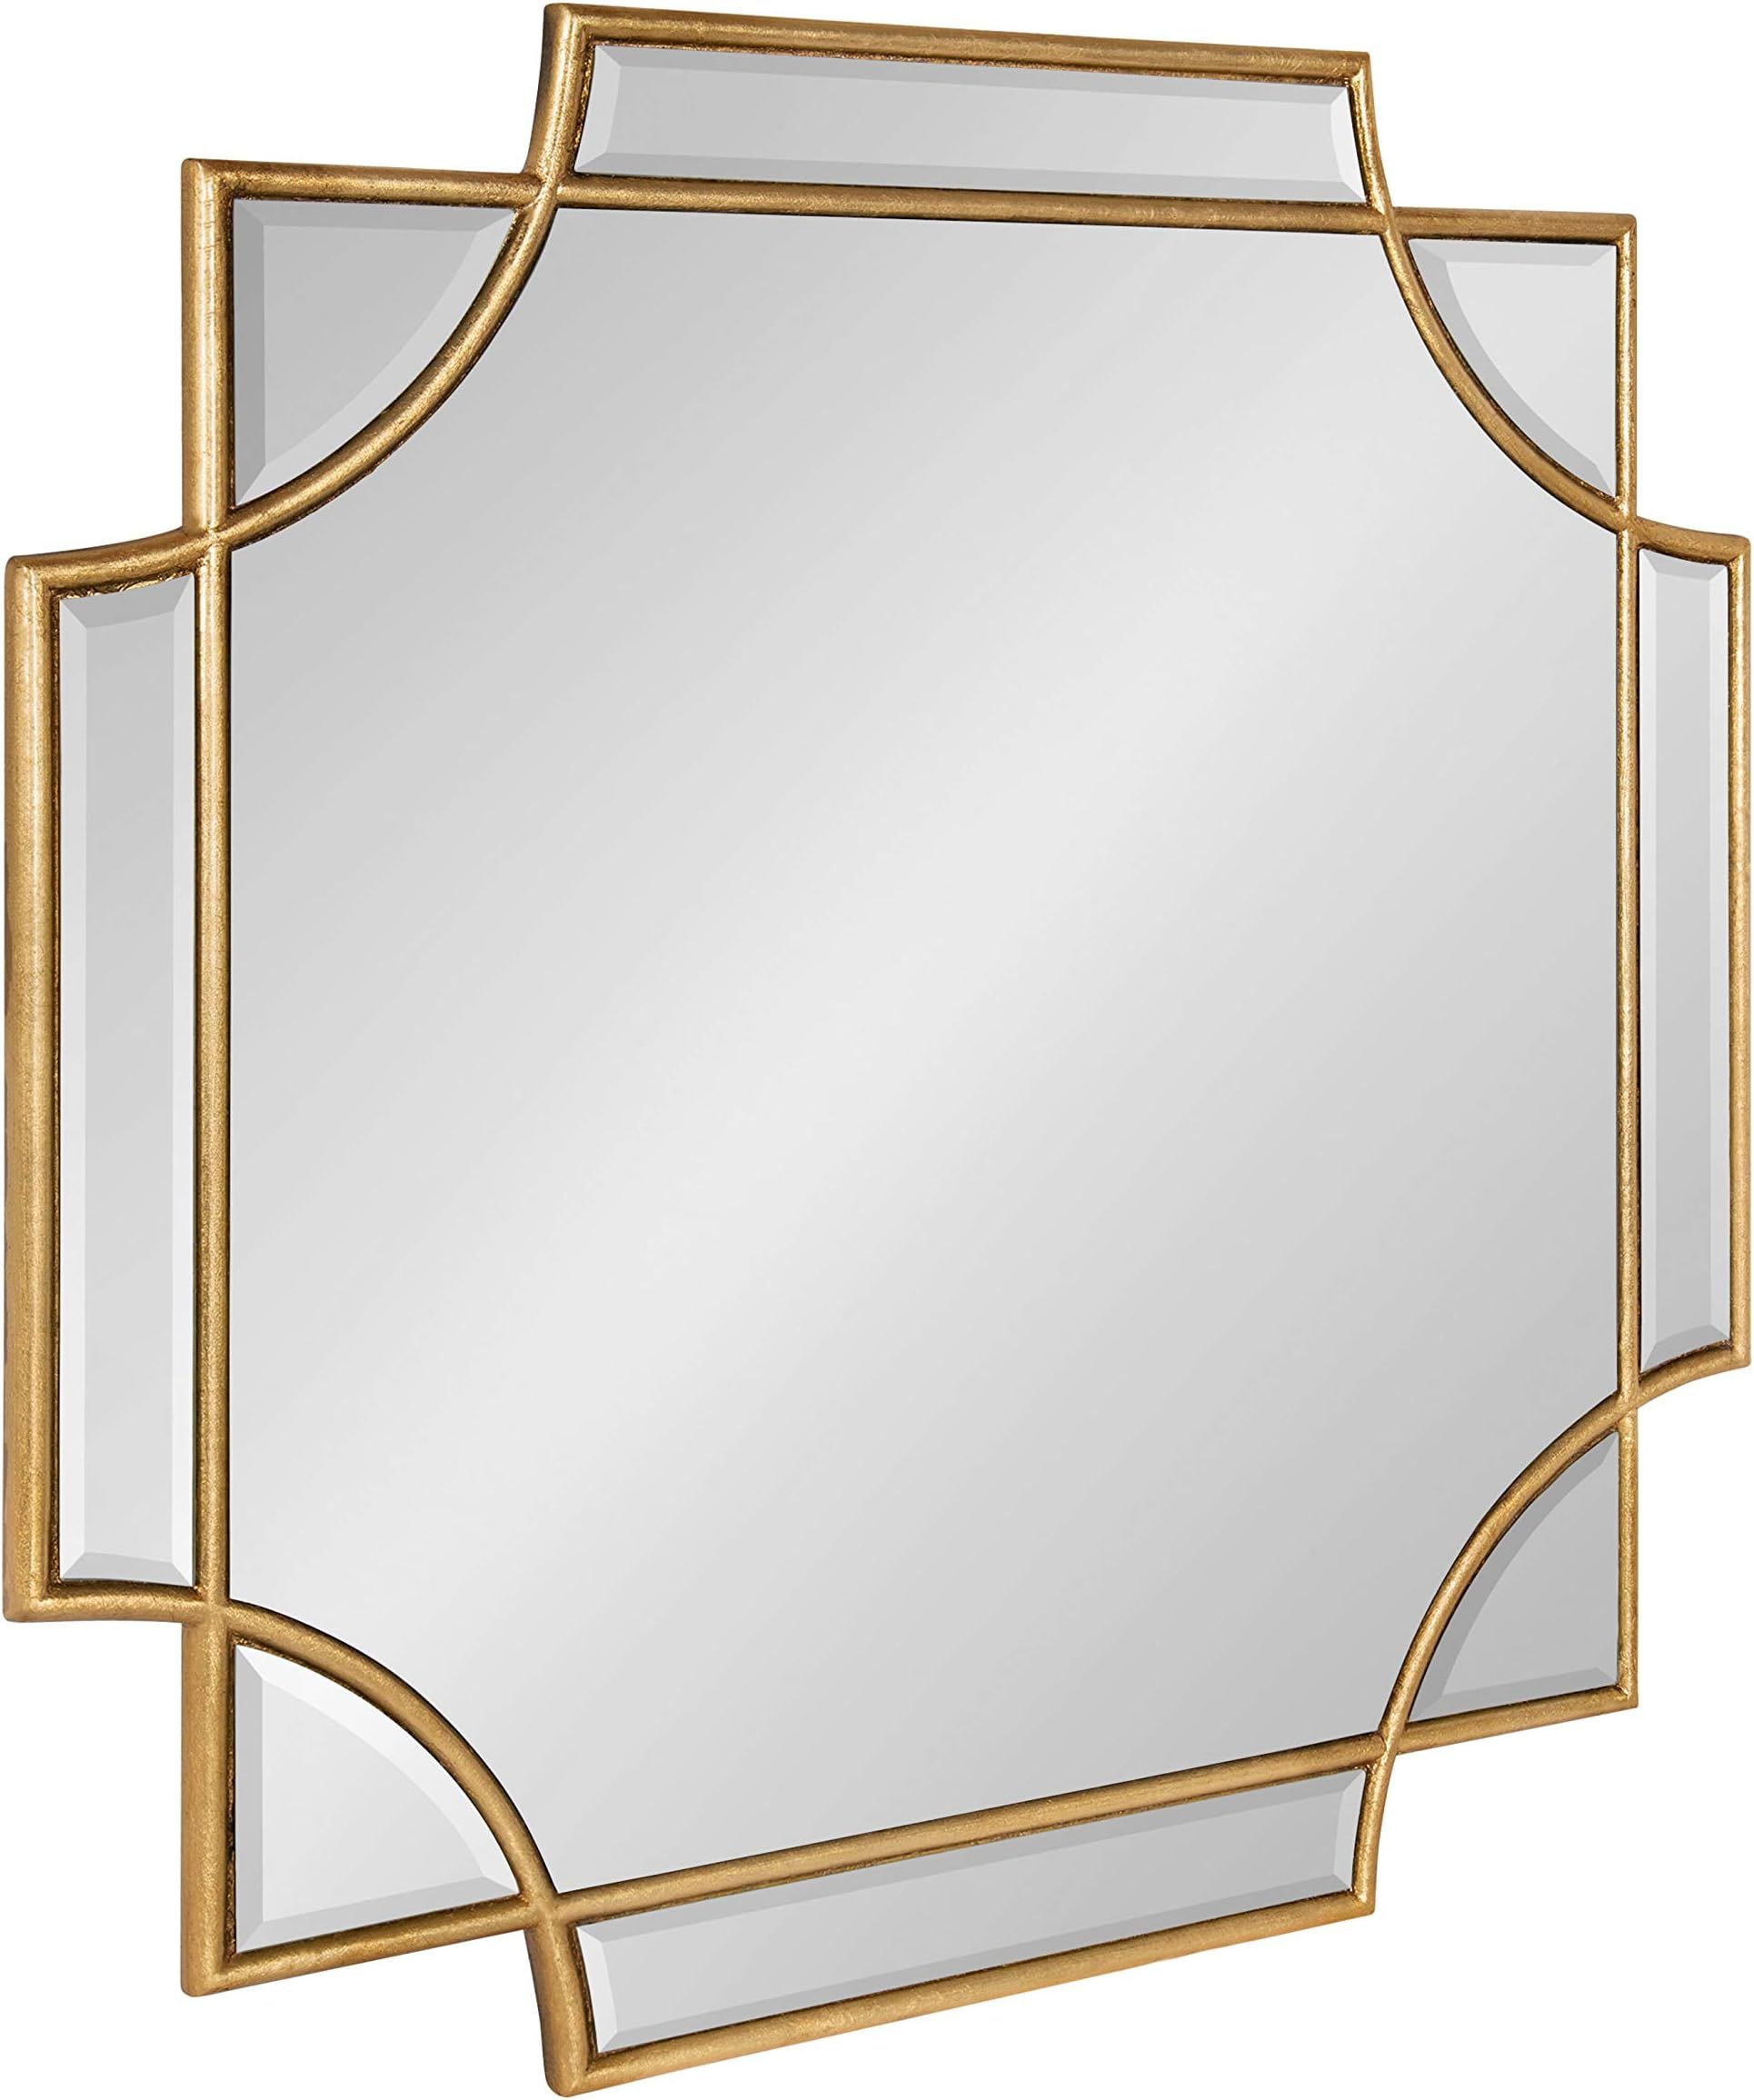 Kate and Laurel Minuette Glam Square Wall Mirror, 24" x 24", Gold, Elegant Traditional Home Decor wi | Amazon (US)